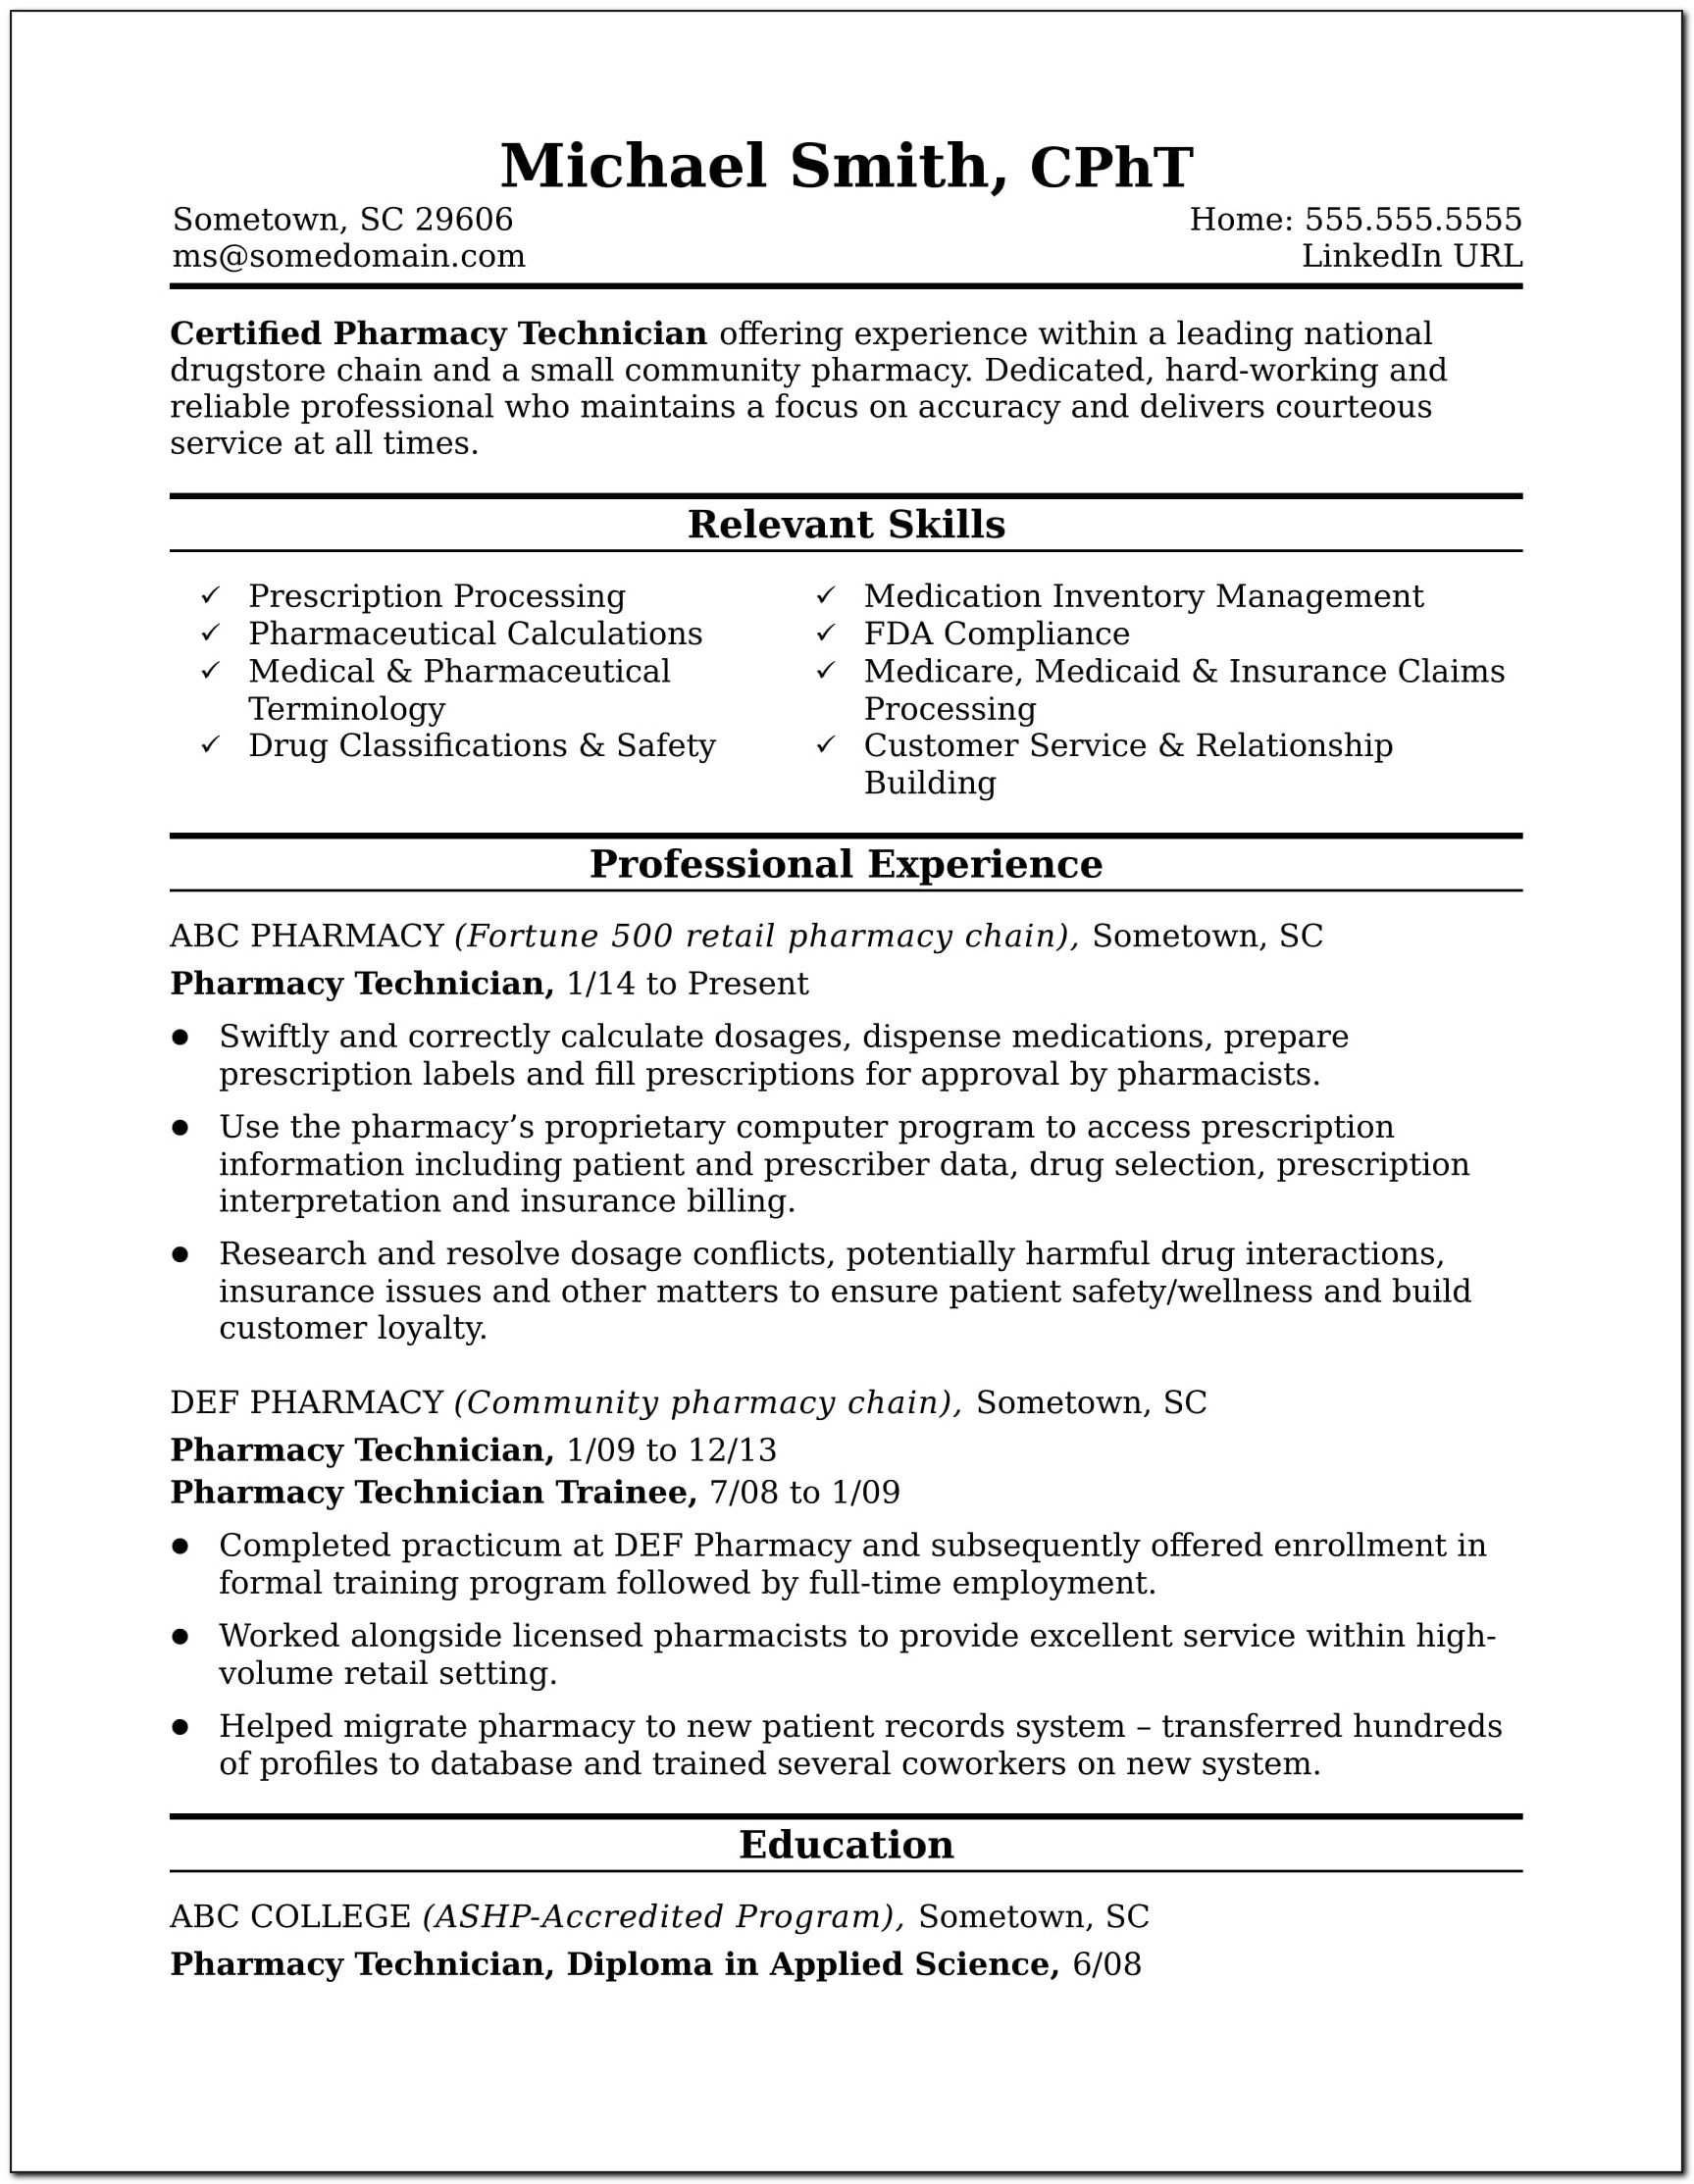 Resume Objective For A Pharmacy Technician